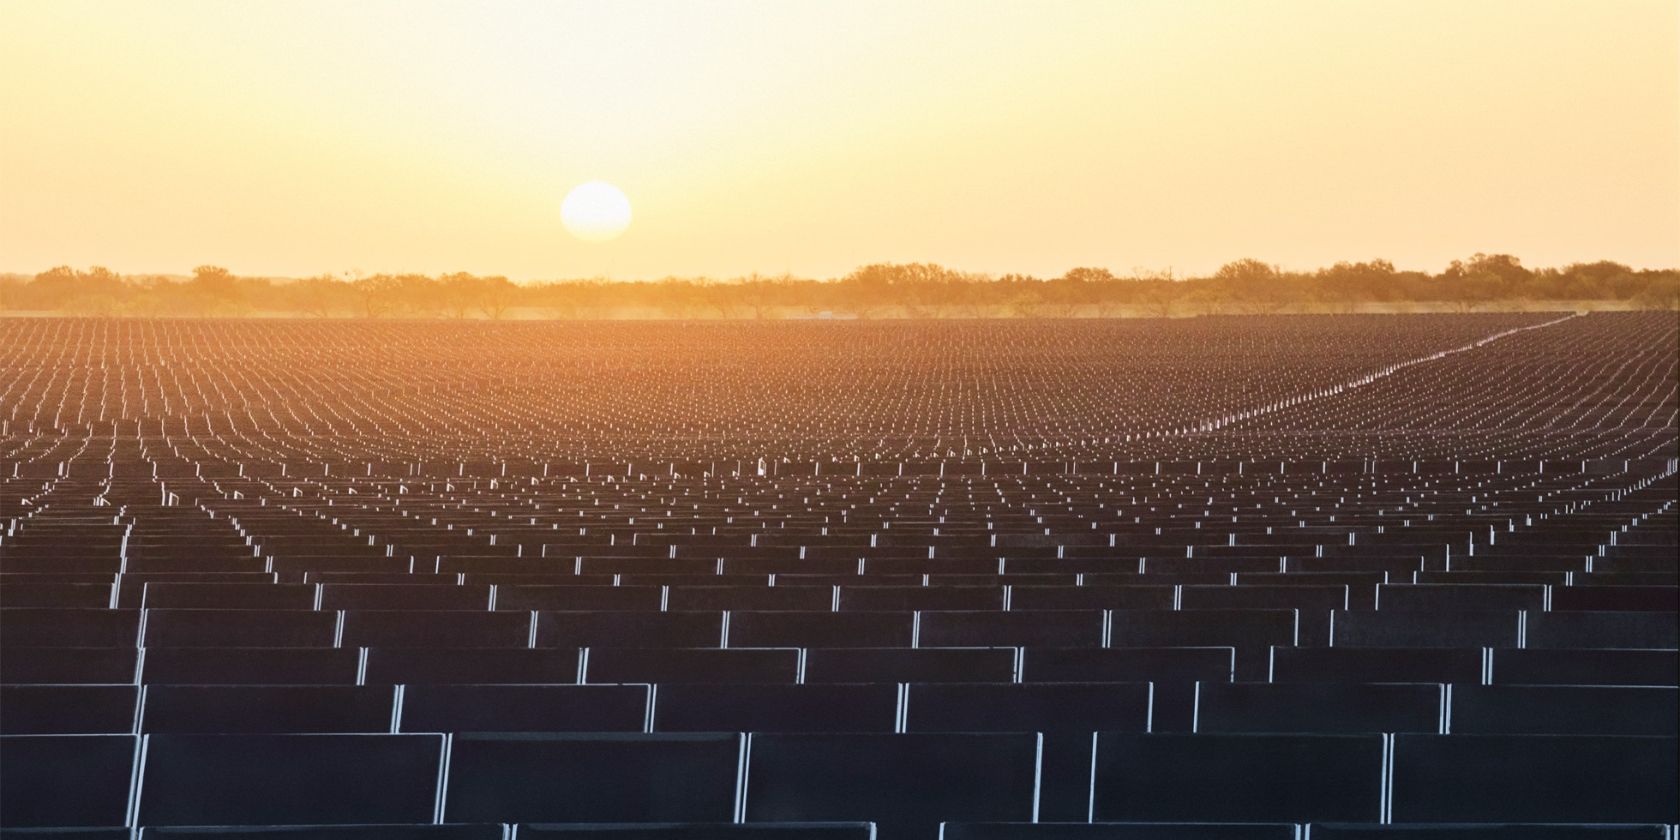 A clean energy farm in Brown County, Texas, with solar panel installations extending to the horizon, photographed at sunset